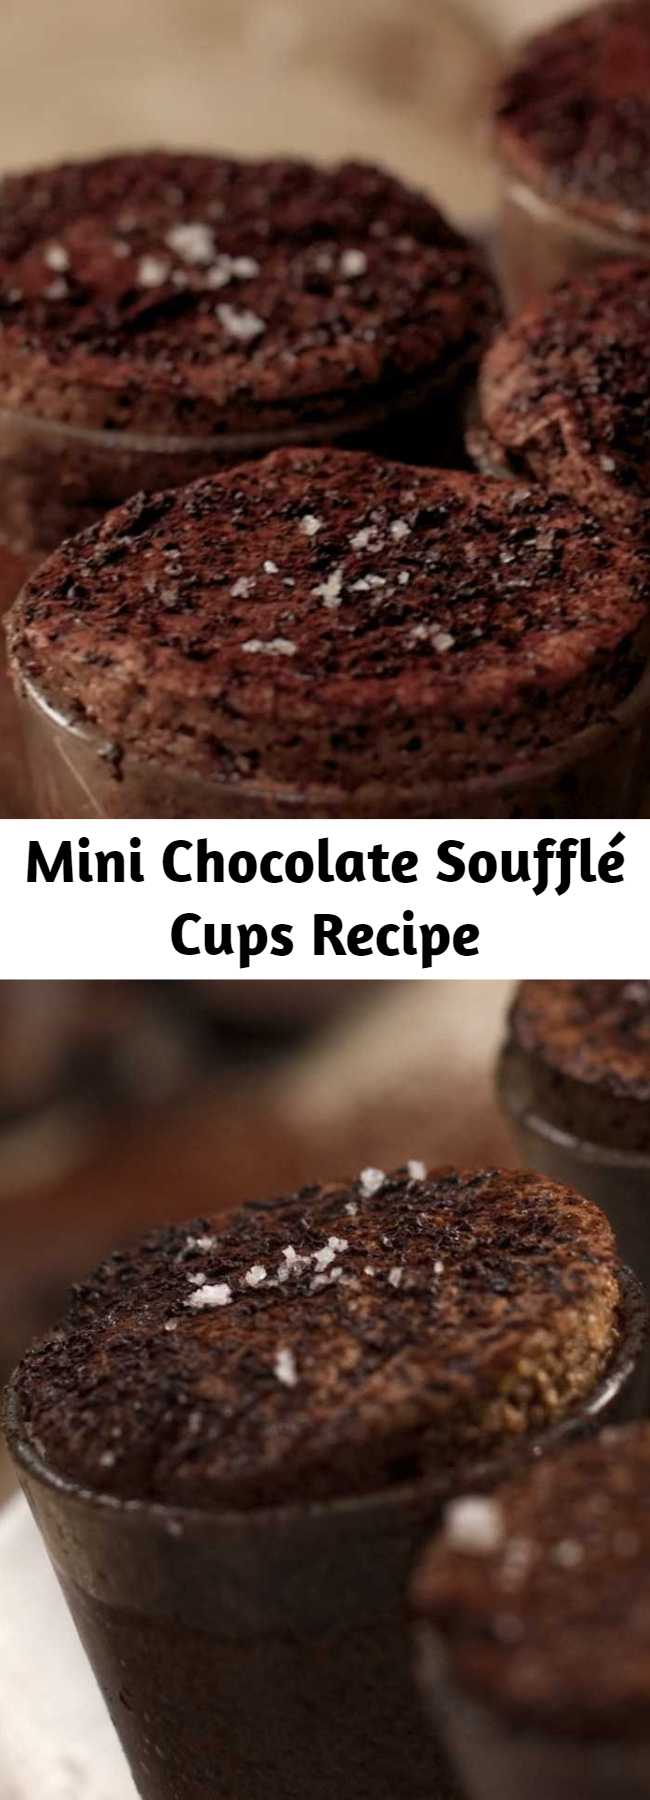 Mini Chocolate Soufflé Cups Recipe - When your dessert table calls for something a little fancy, fluffy chocolate topped with sea salt is the answer.